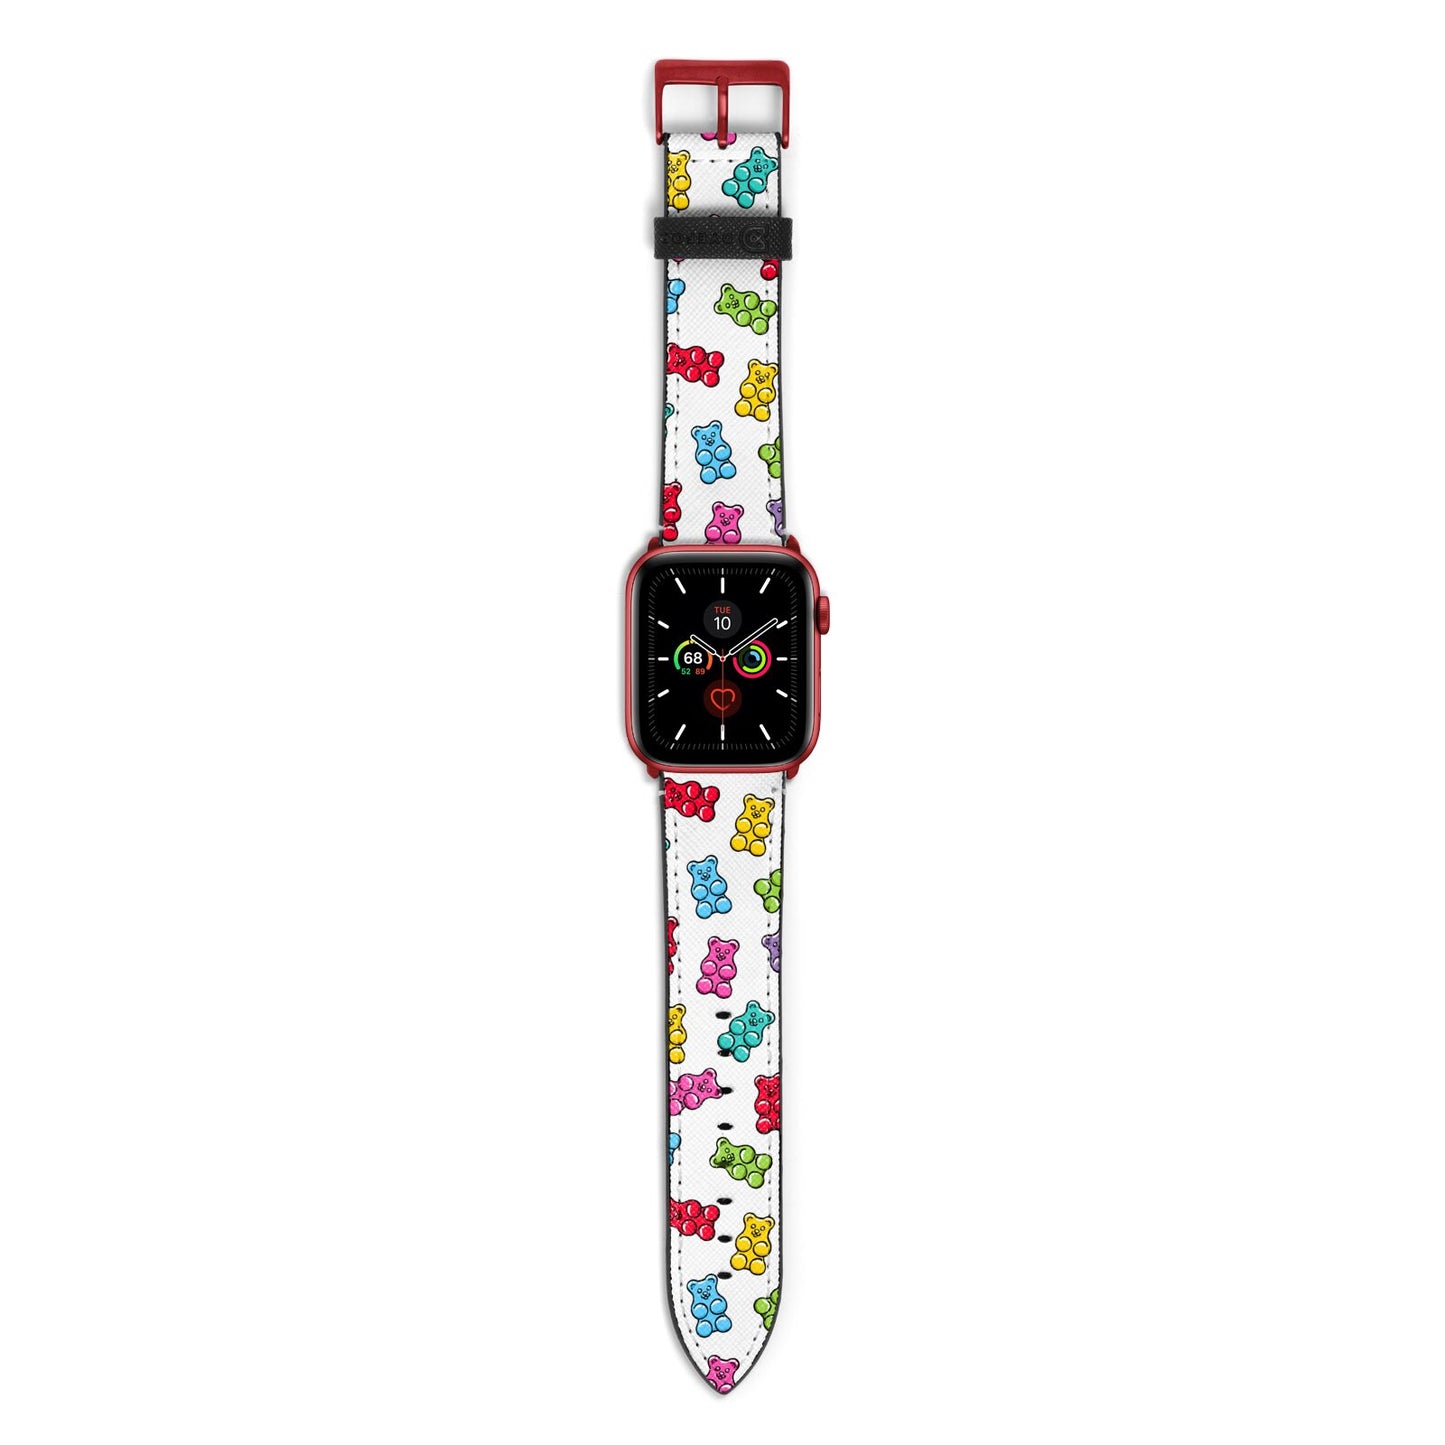 Gummy Bear Apple Watch Strap with Red Hardware